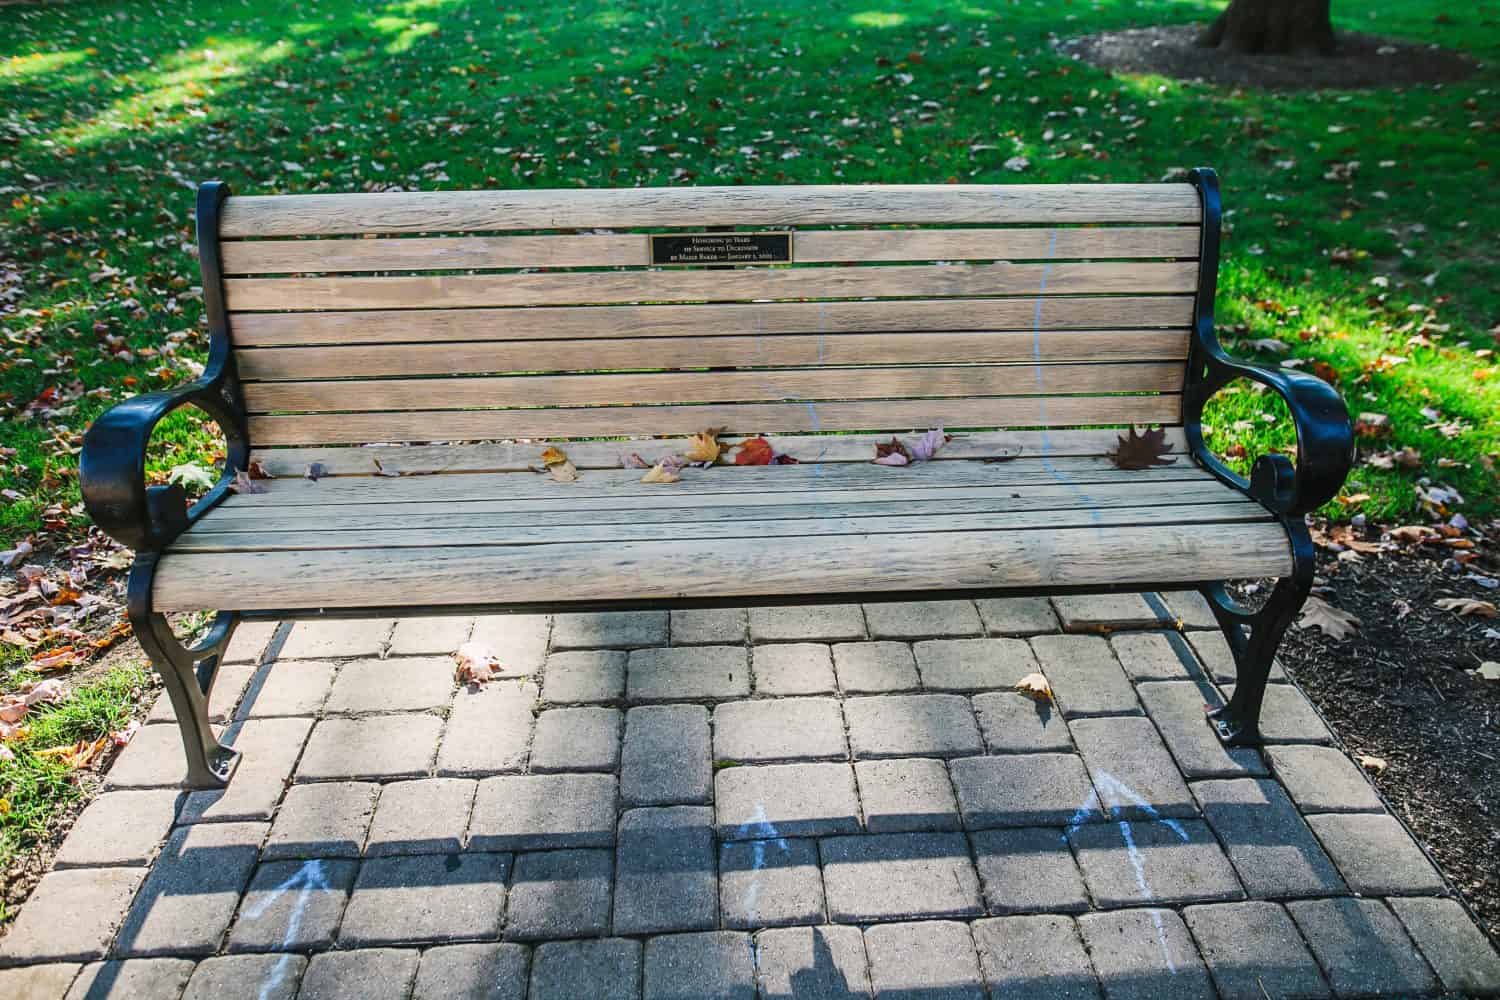 Bench at the Dickinson College campus.